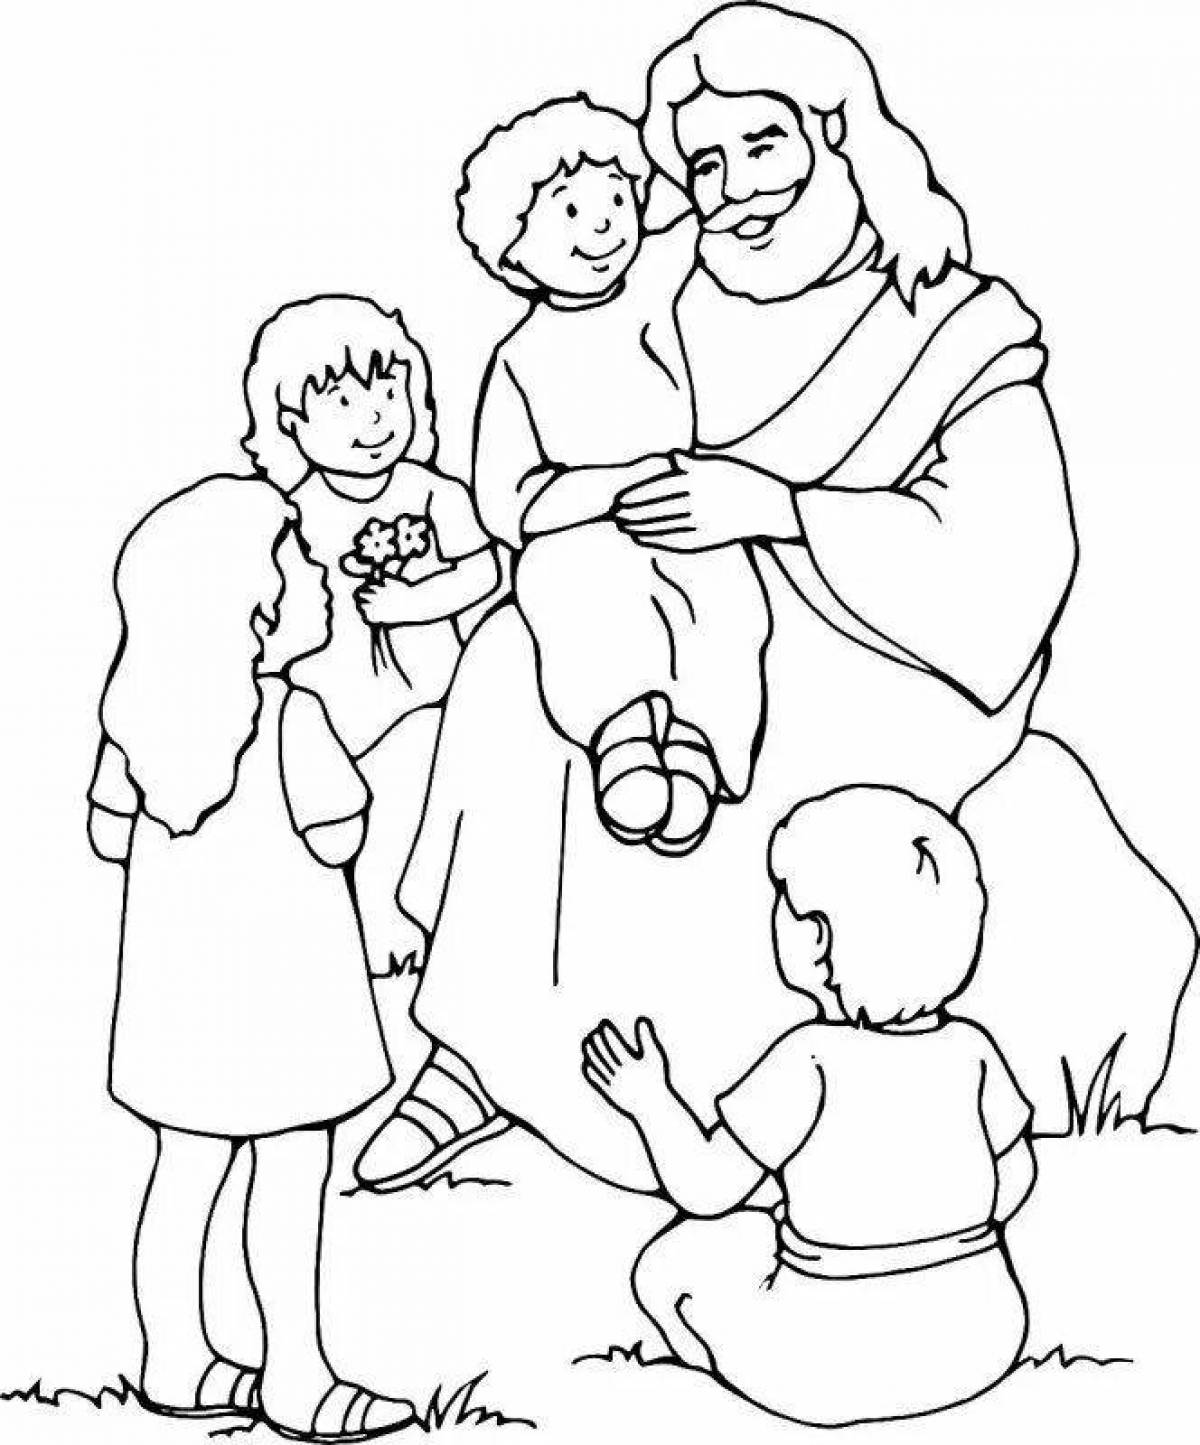 Glorious christian baby coloring page